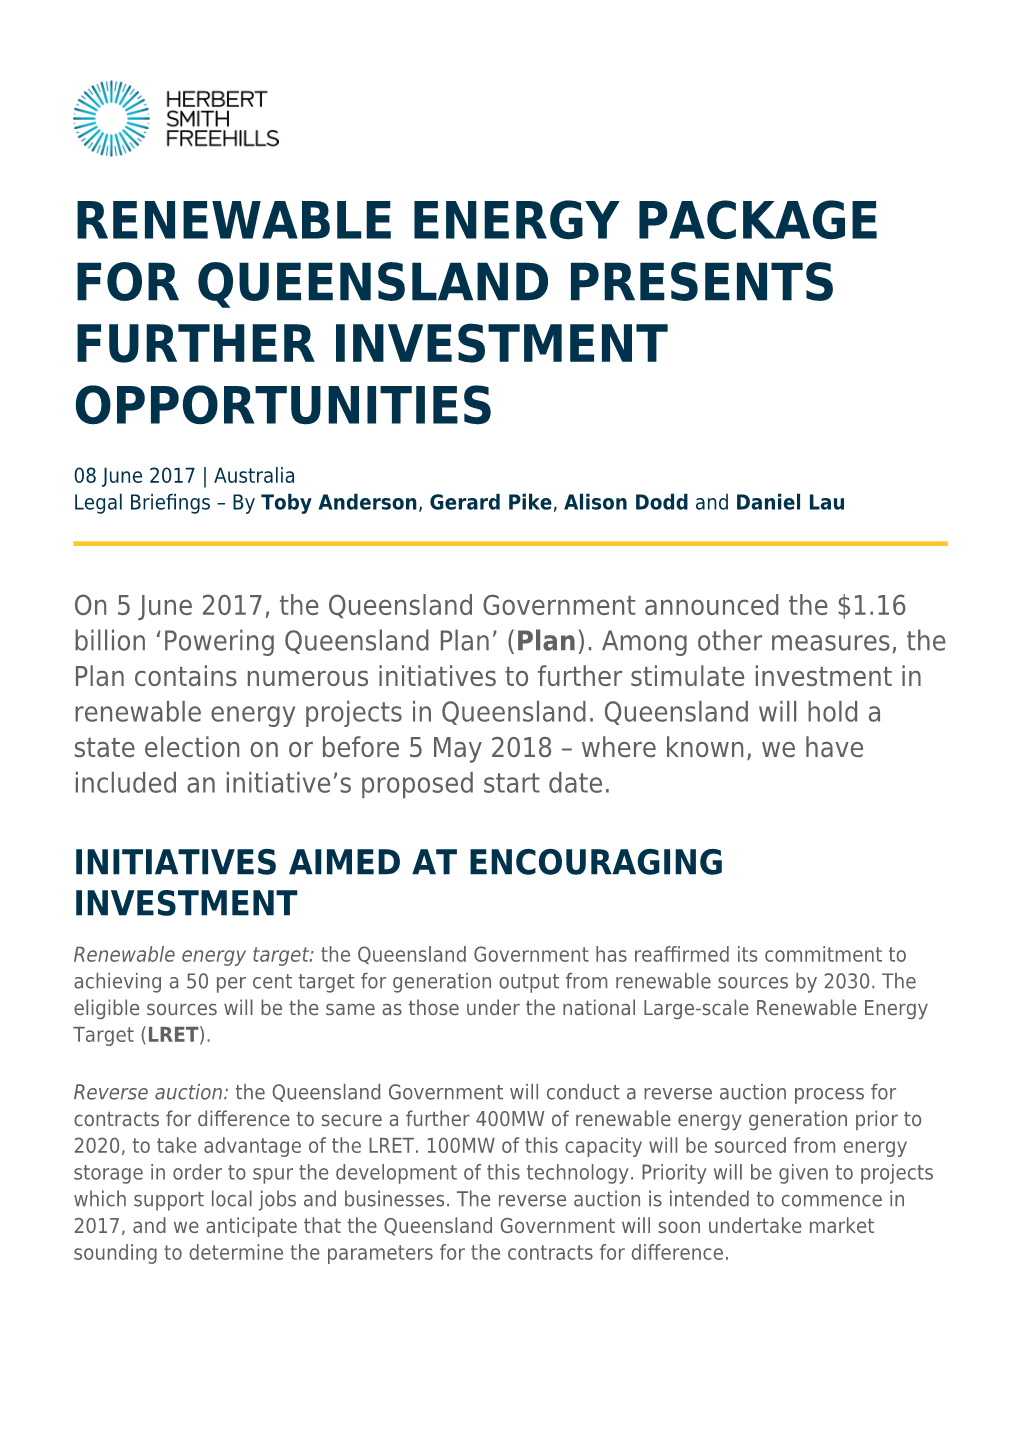 Renewable Energy Package for Queensland Presents Further Investment Opportunities